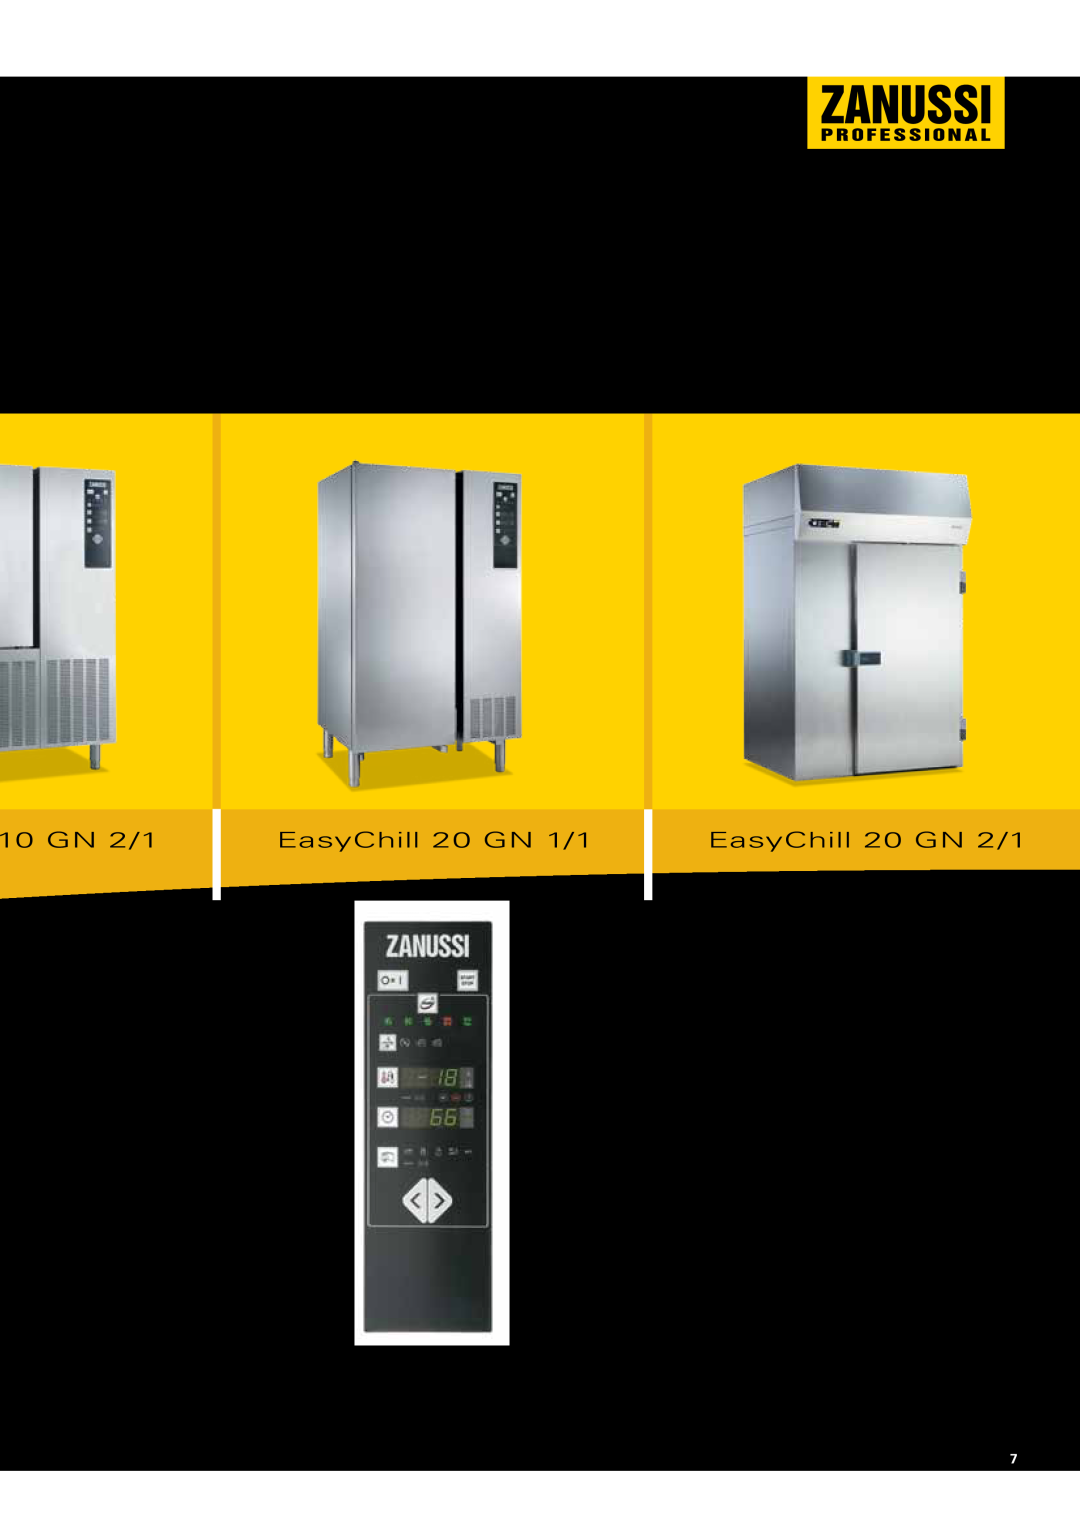 Zanussi Convection Oven manual hiller/Freezers, The solution to guarantee perfect results, 10 GN 2/1, EasyChill 20 GN 1/1 